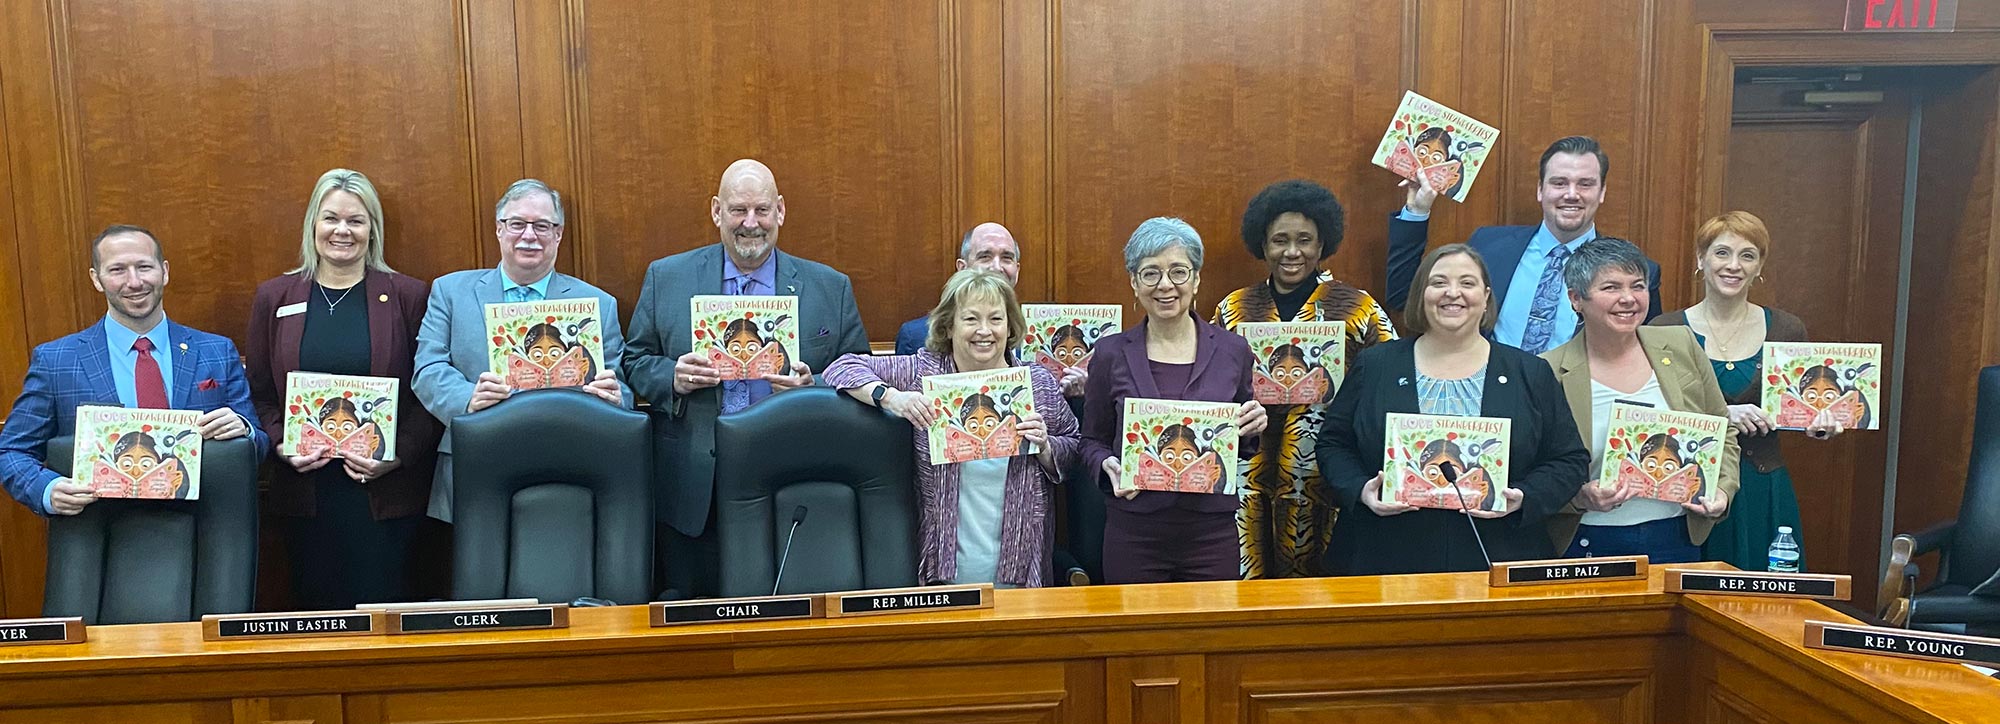 On Wednesday, March 1, Michigan Farm Bureau presented House Agriculture Committee Members with the book "I Love Strawberries!" by Shannon Anderson for March is Reading Month.